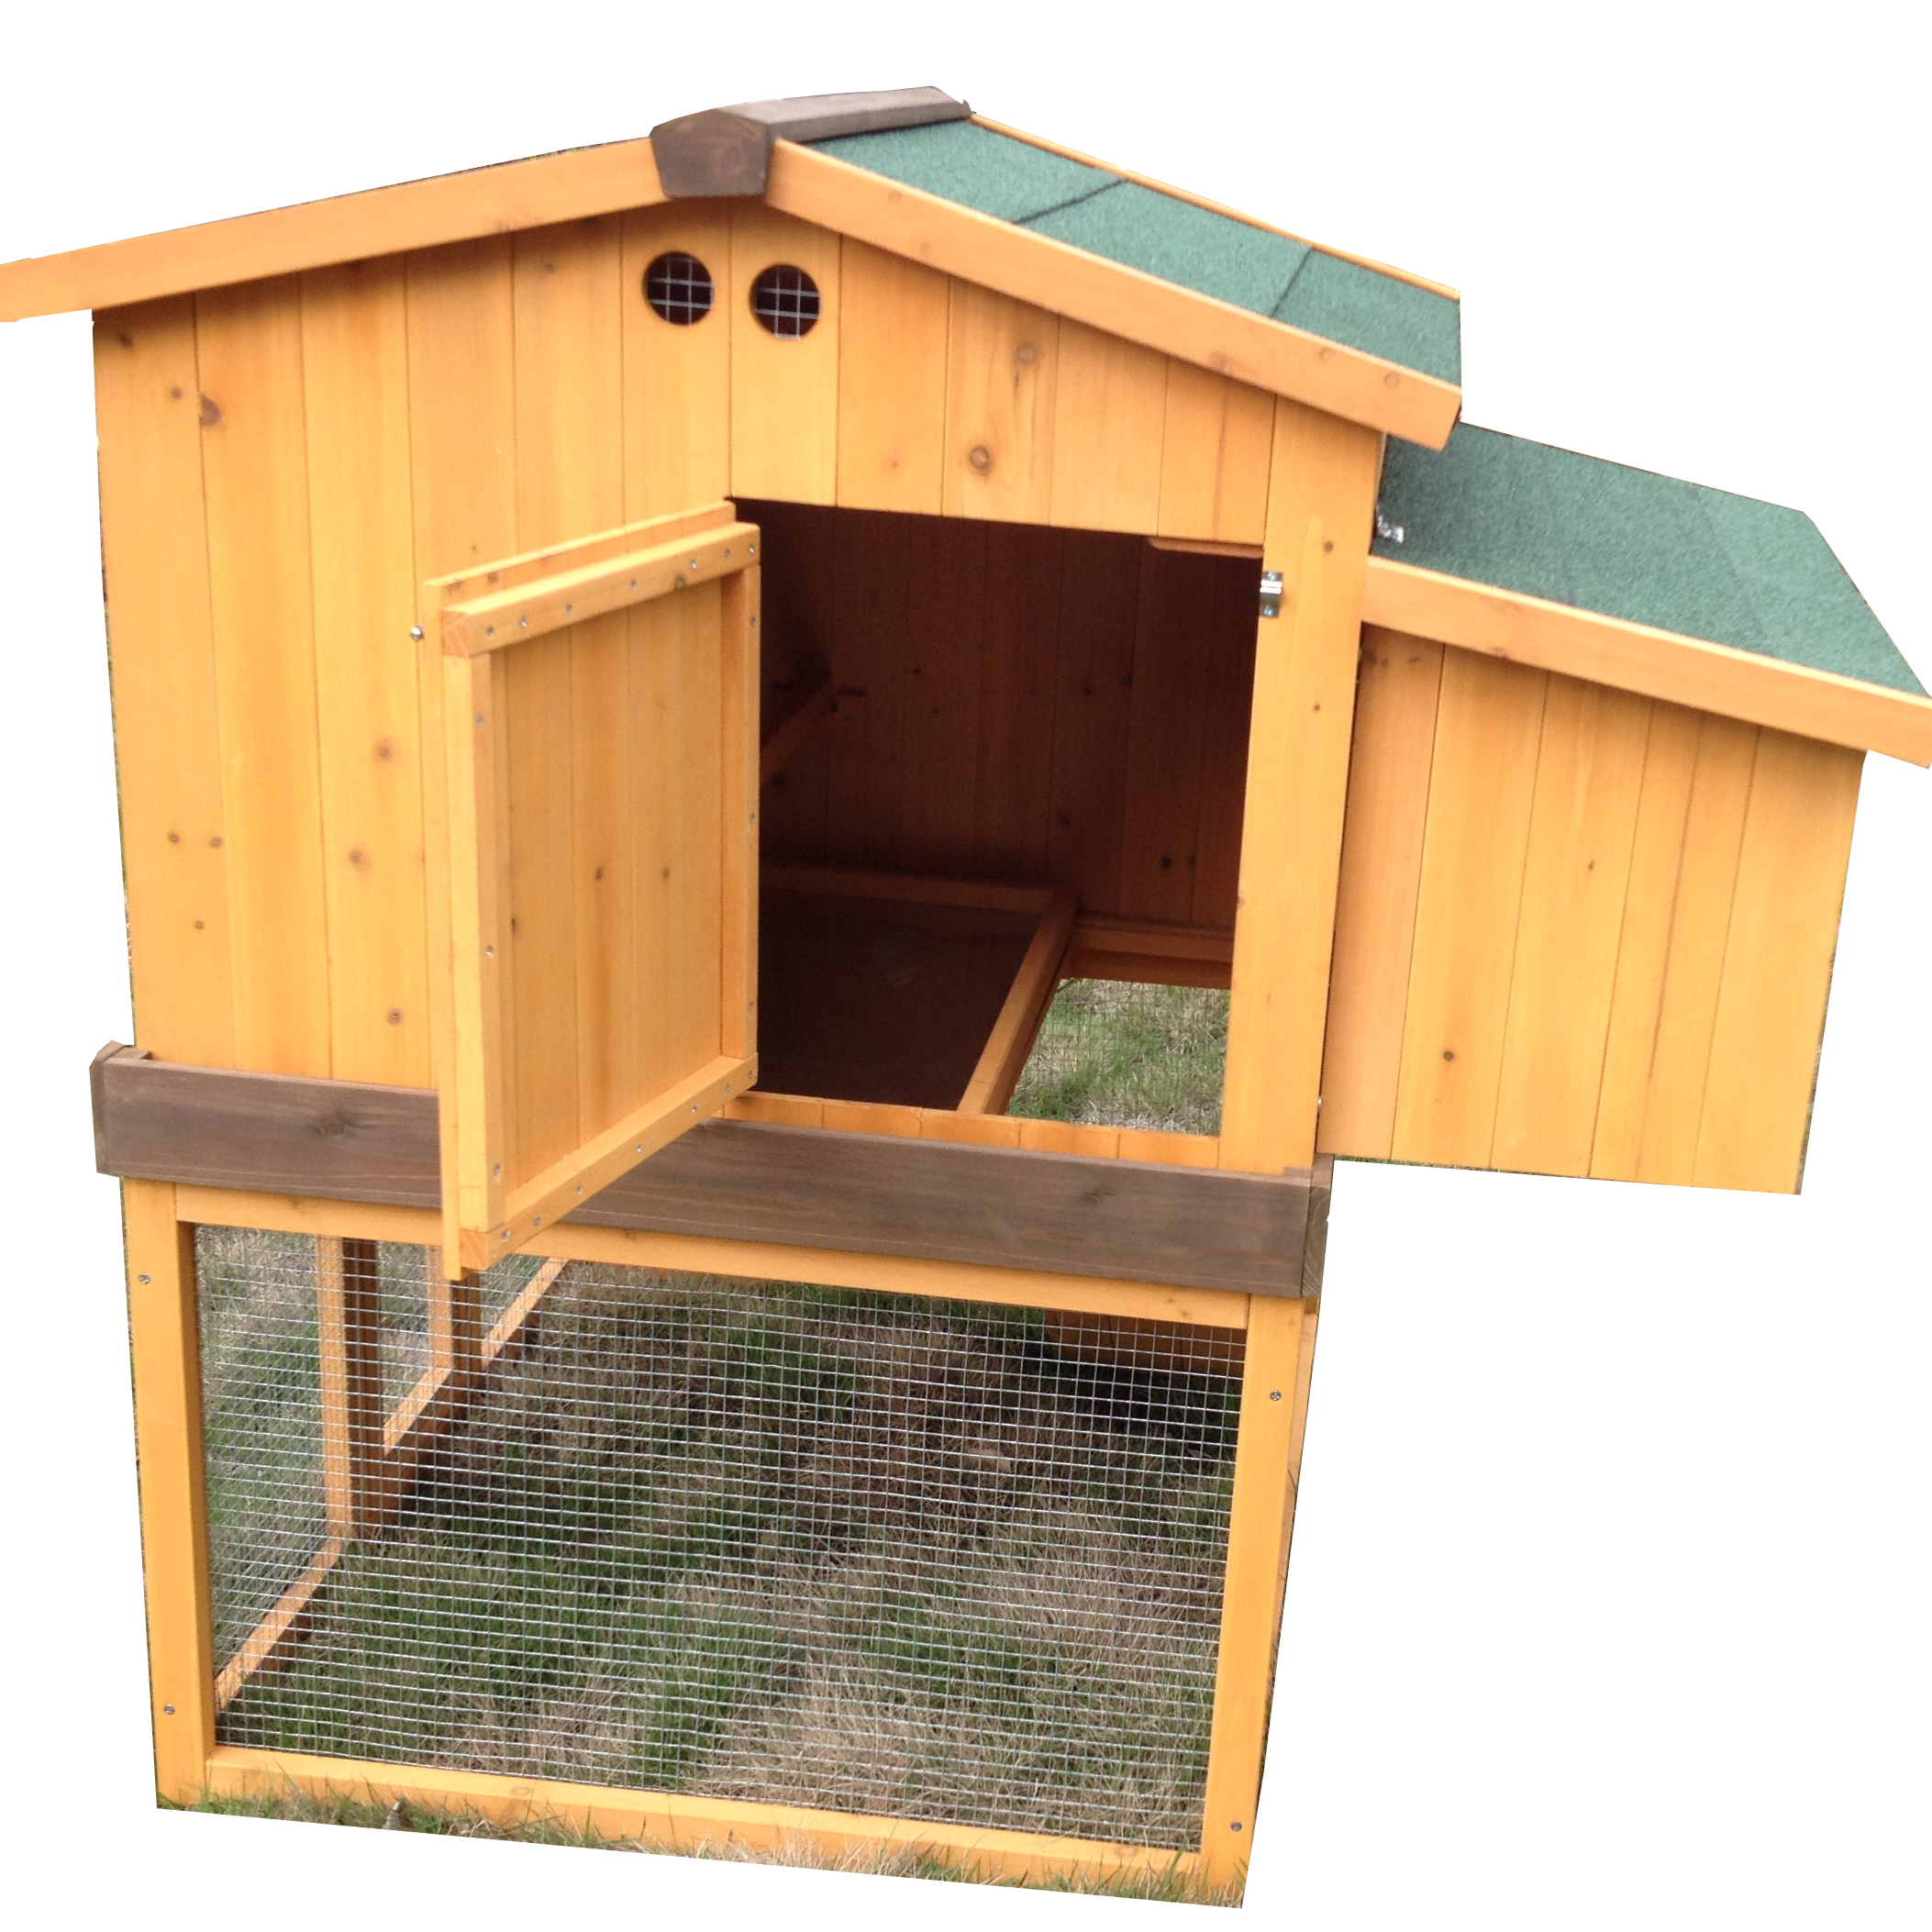 Popular Design for Portable Dog Kennels -
 Poultry Farm Small Backyard Urban Build  Chicken Coop For Sale Nesting Boxes Tractor – Easy